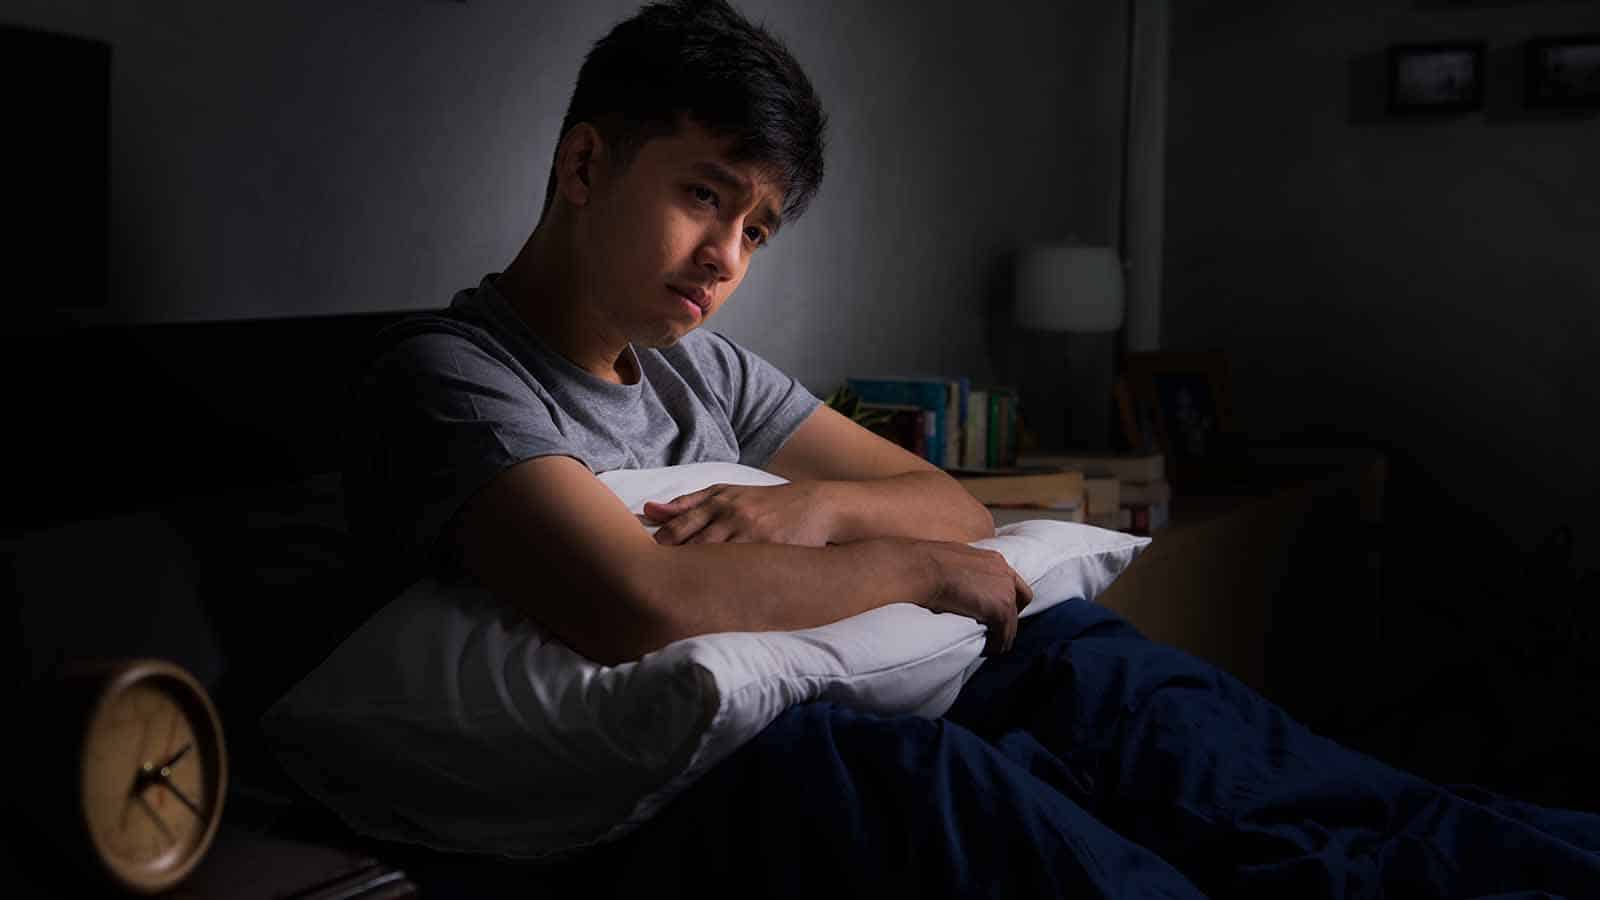 Depressed young man suffering from insomnia sitting in bed